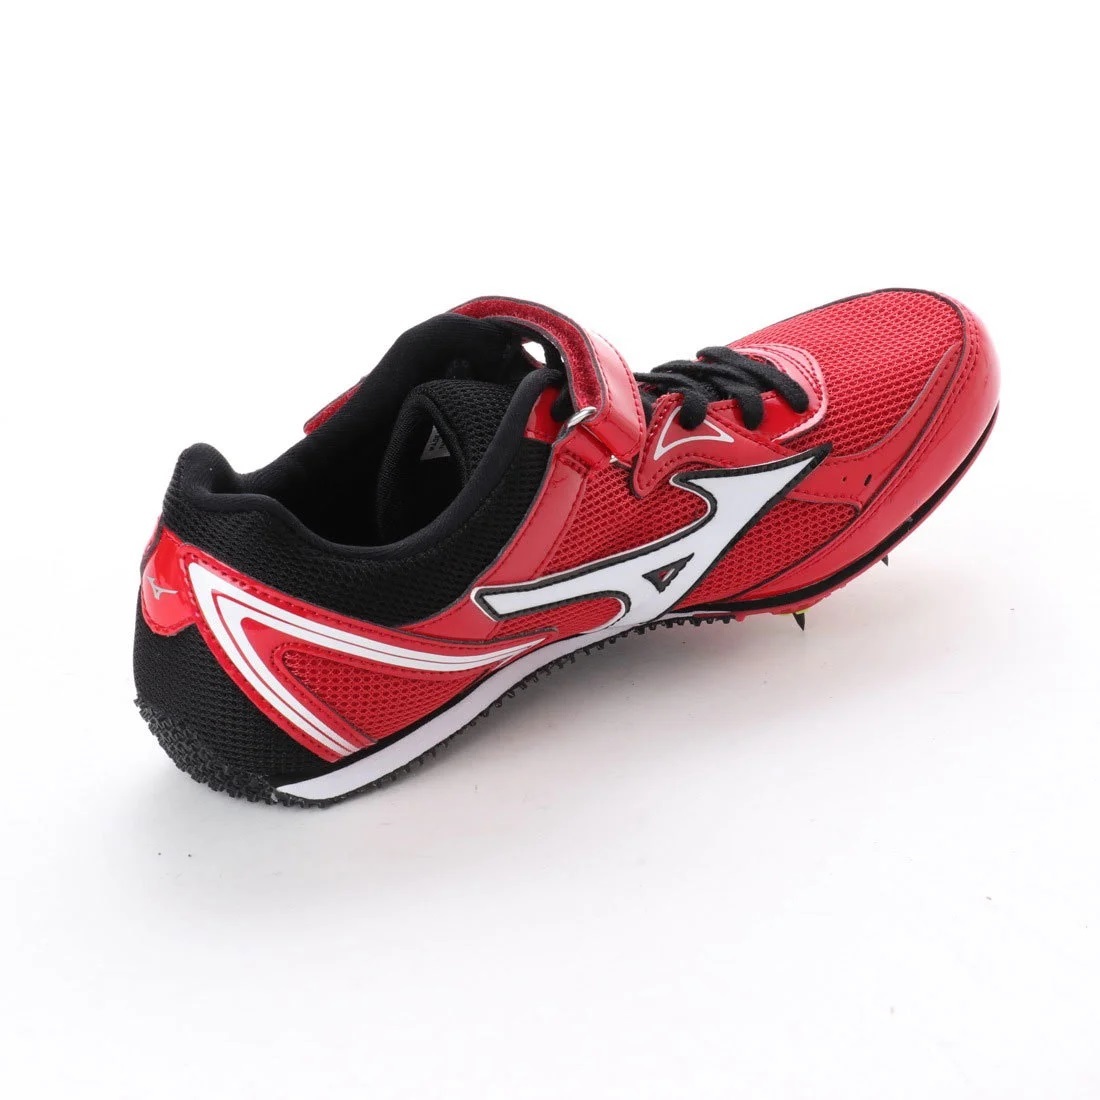  Mizuno 28cm City u swing 2 red tax included price 14850 jpy MIZUNO CITIUS WING 2 land spike long distance 